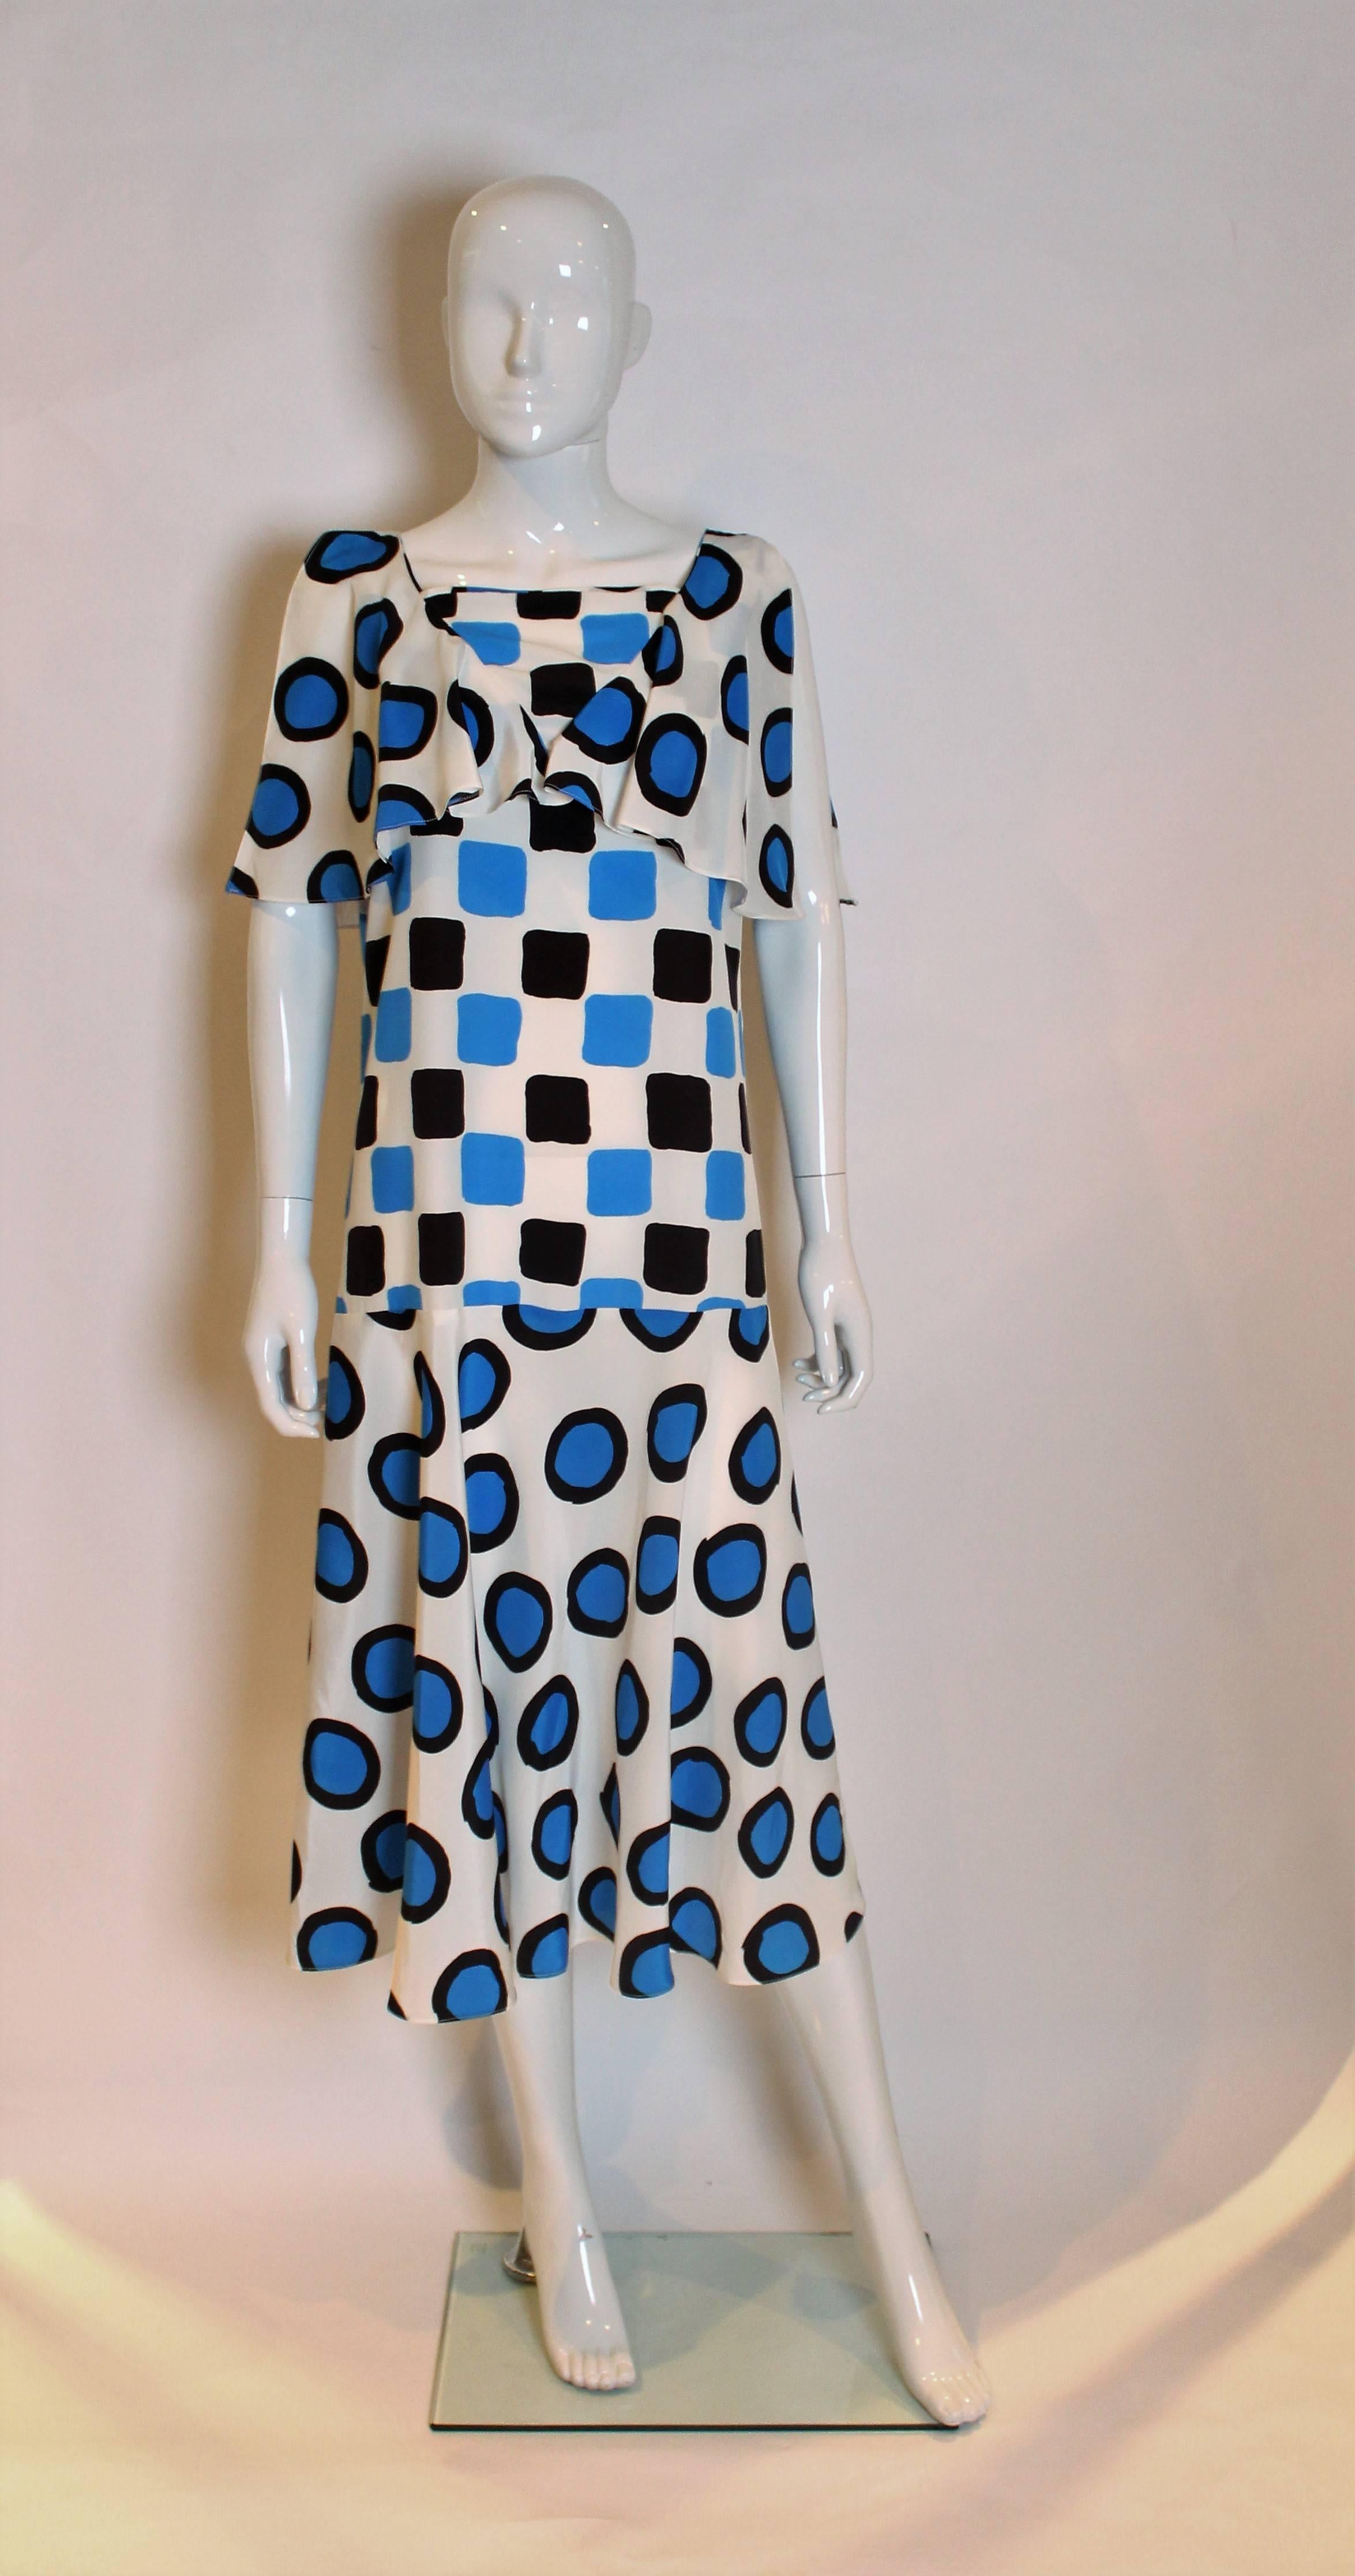 A chic dress by Chrisitina Strambolia ( who produced the Diana revenge dress).
The dress has a white background, with blue and black circles,  drop waist, flared skirt and loose collar.